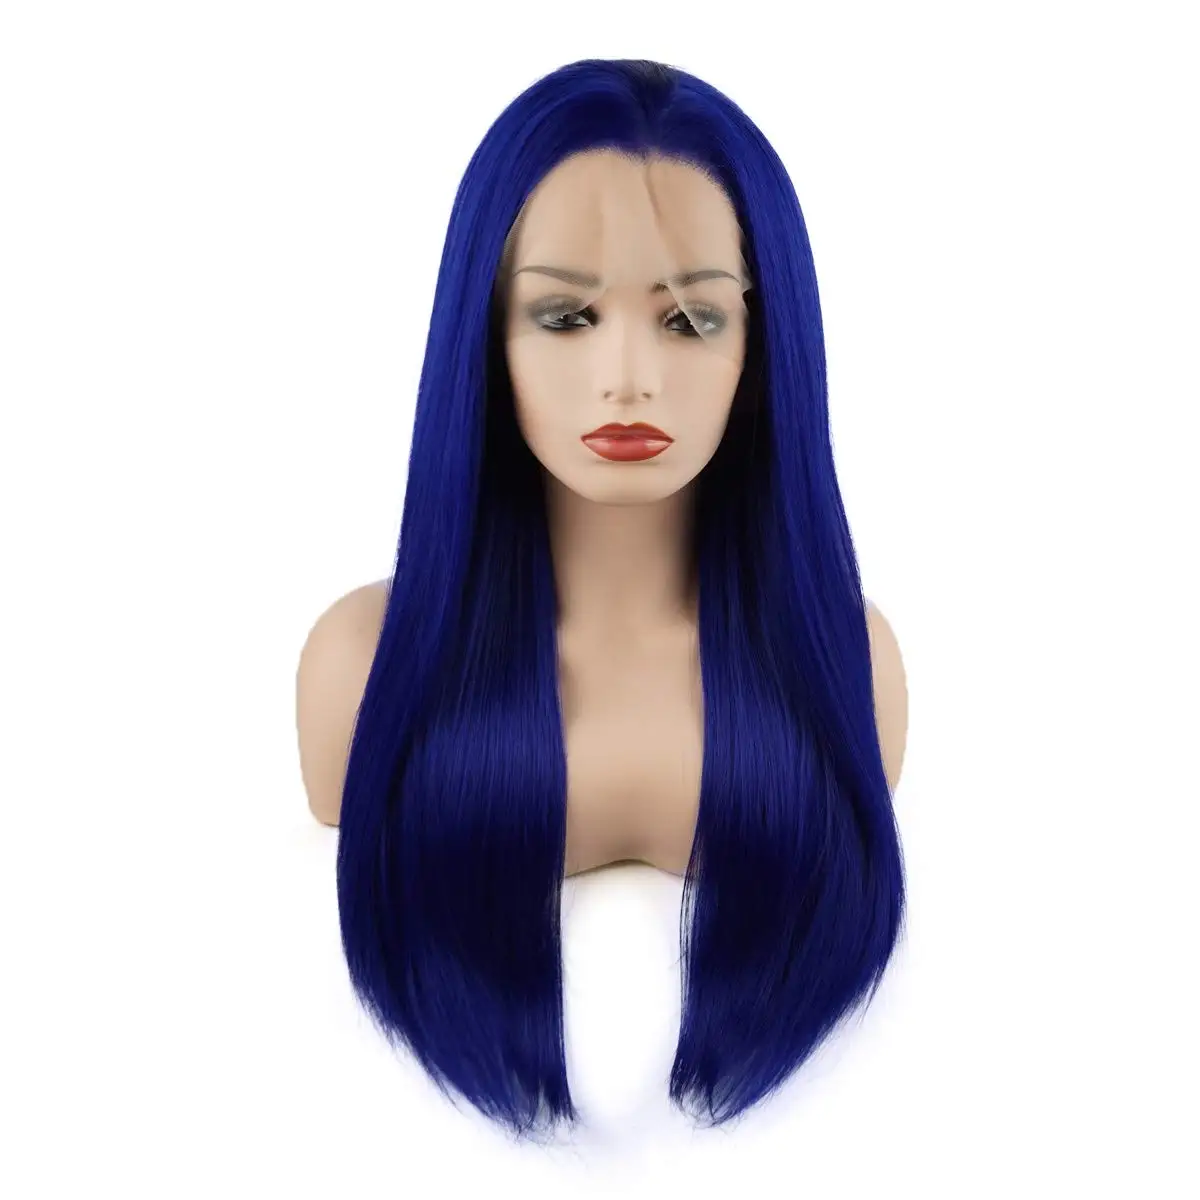 Jeelion Hair Straight Long 24inch Navy Blue Half Hand Tied Heavy Density Synthetic Lace Front Wigs